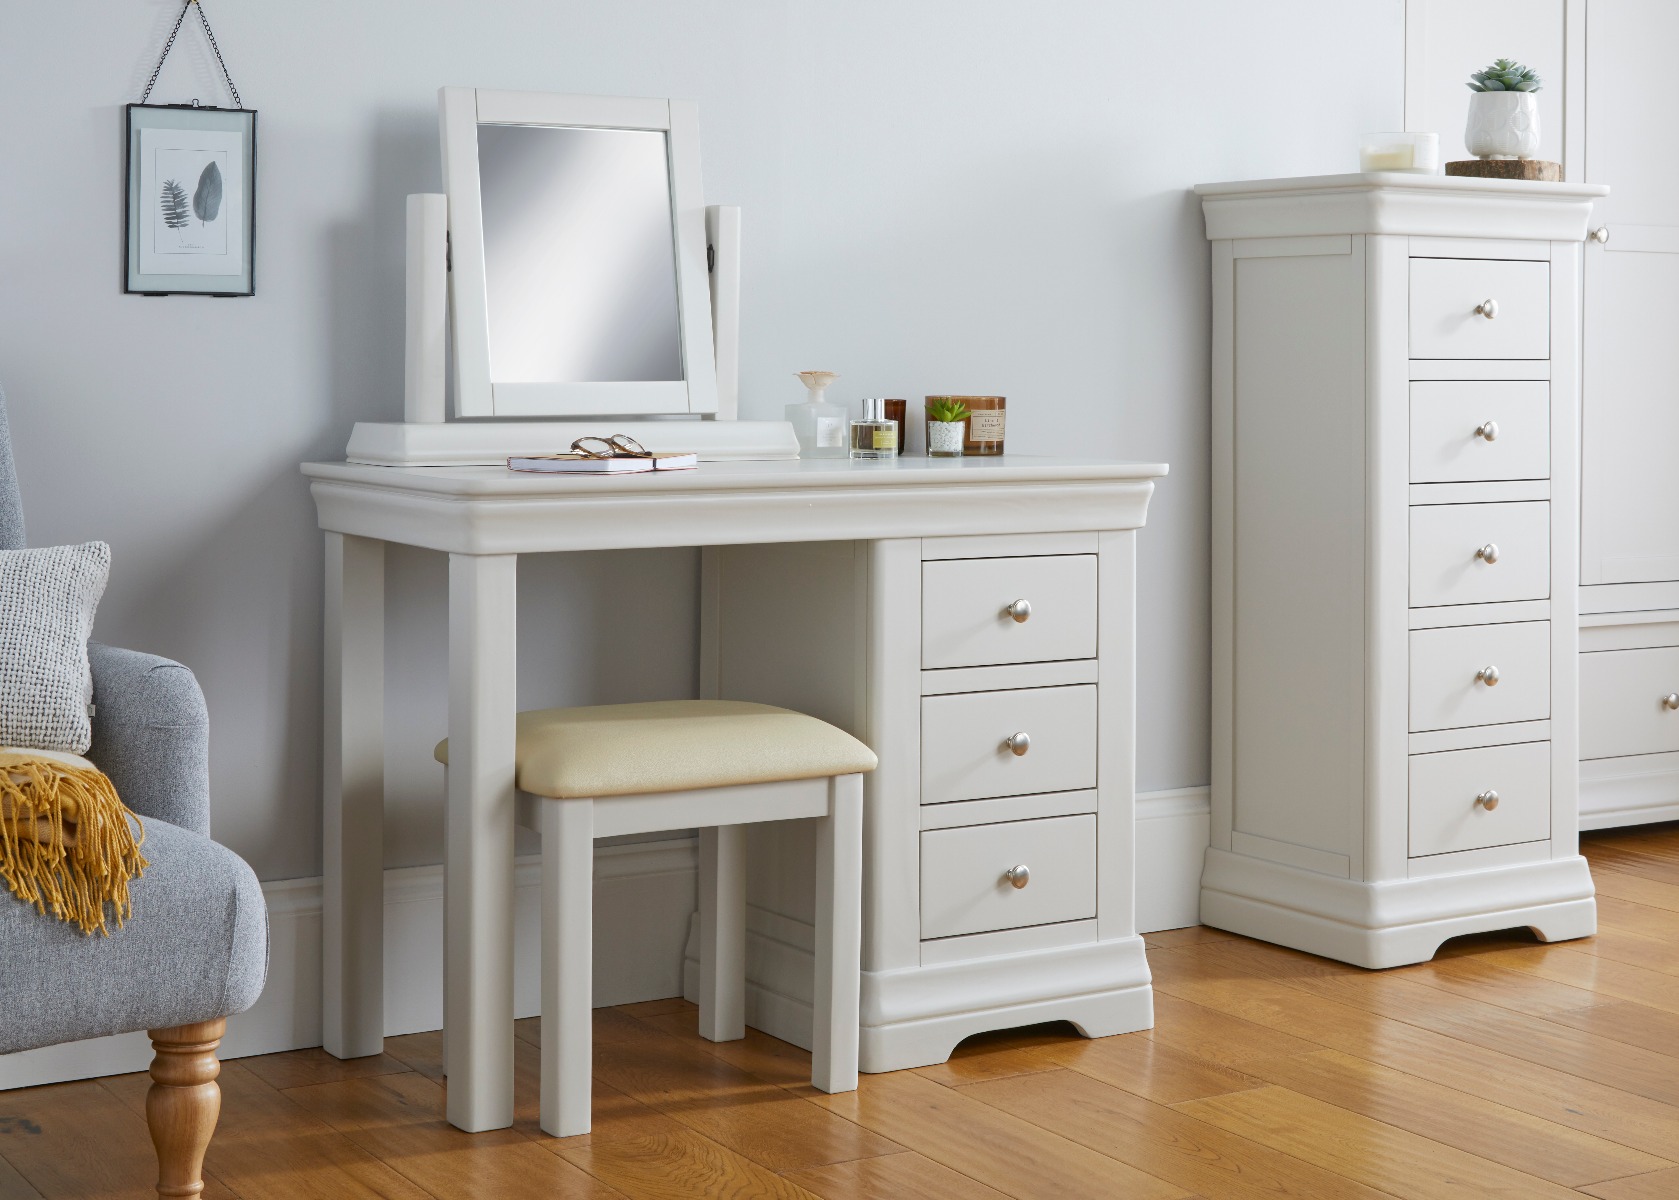 Wilmslow White Double Pedestal Dressing Table Set with Mirror